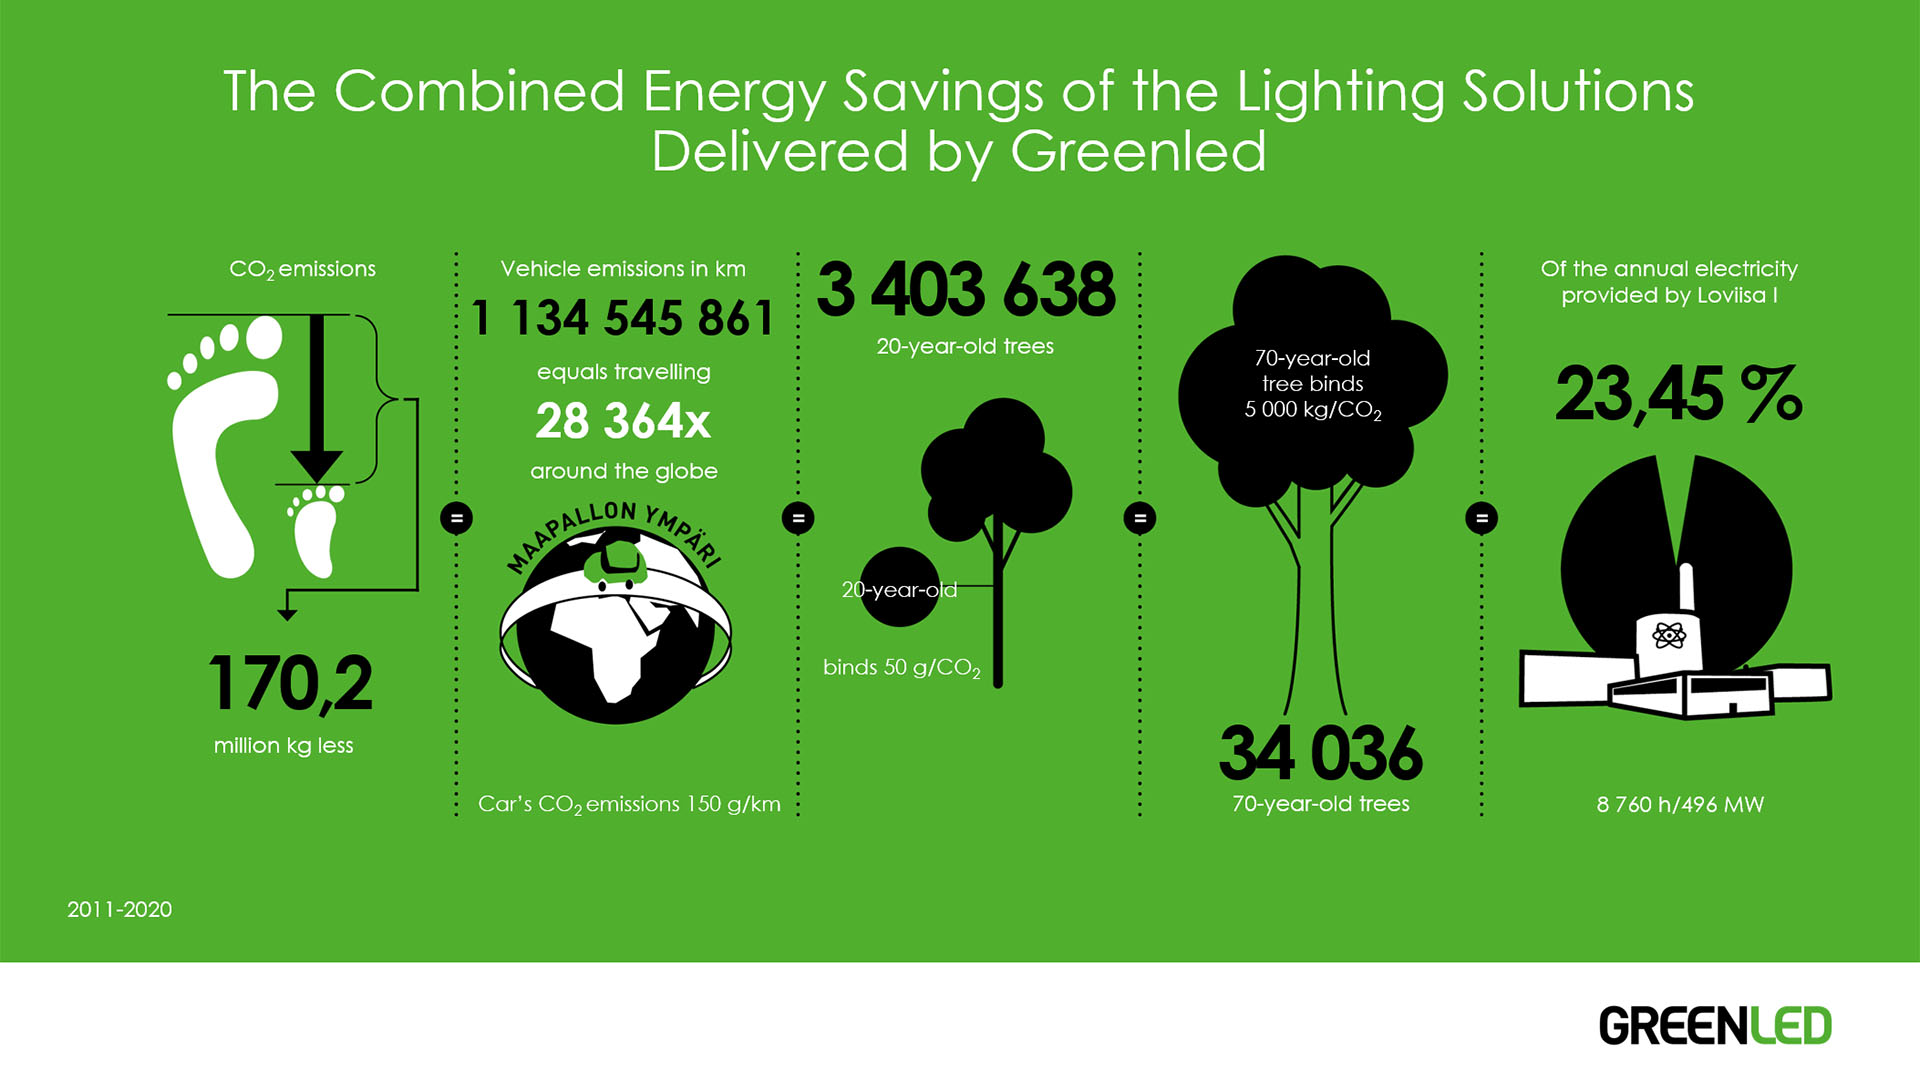 The combined energy savings of the lighting solutions delivered by Greenled 2011-2020